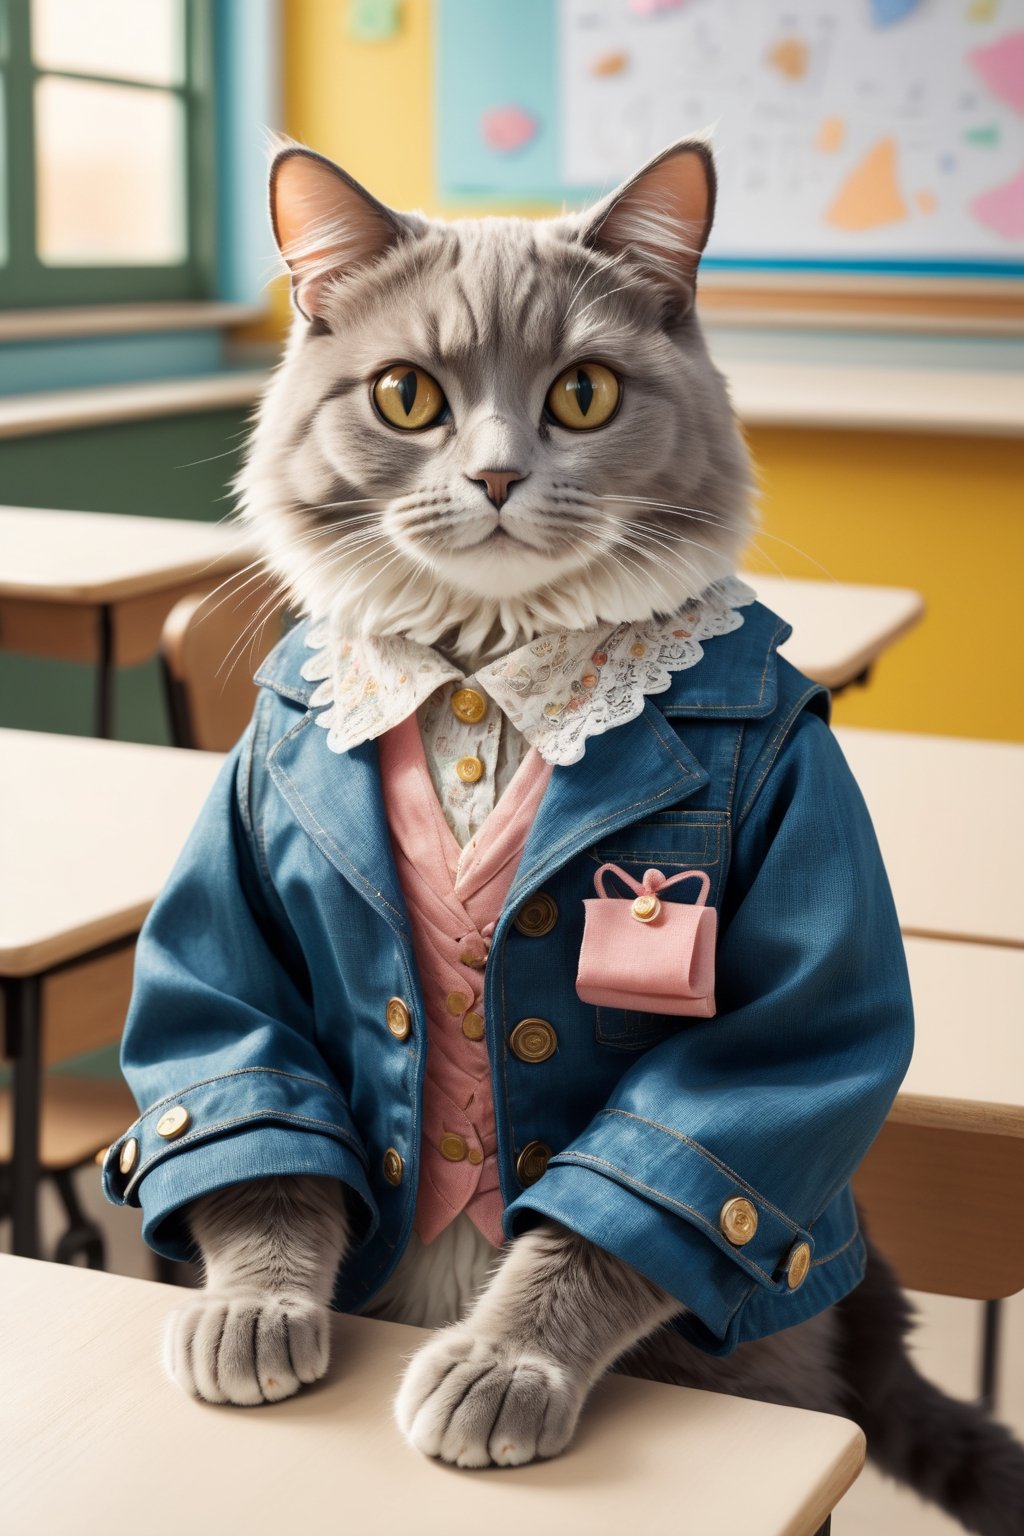 Envision an adorable and playful scene: A cat sits in a classroom front of a foodtable, adorned with glasses and a vintage jacket, resembling an intellectual little princess